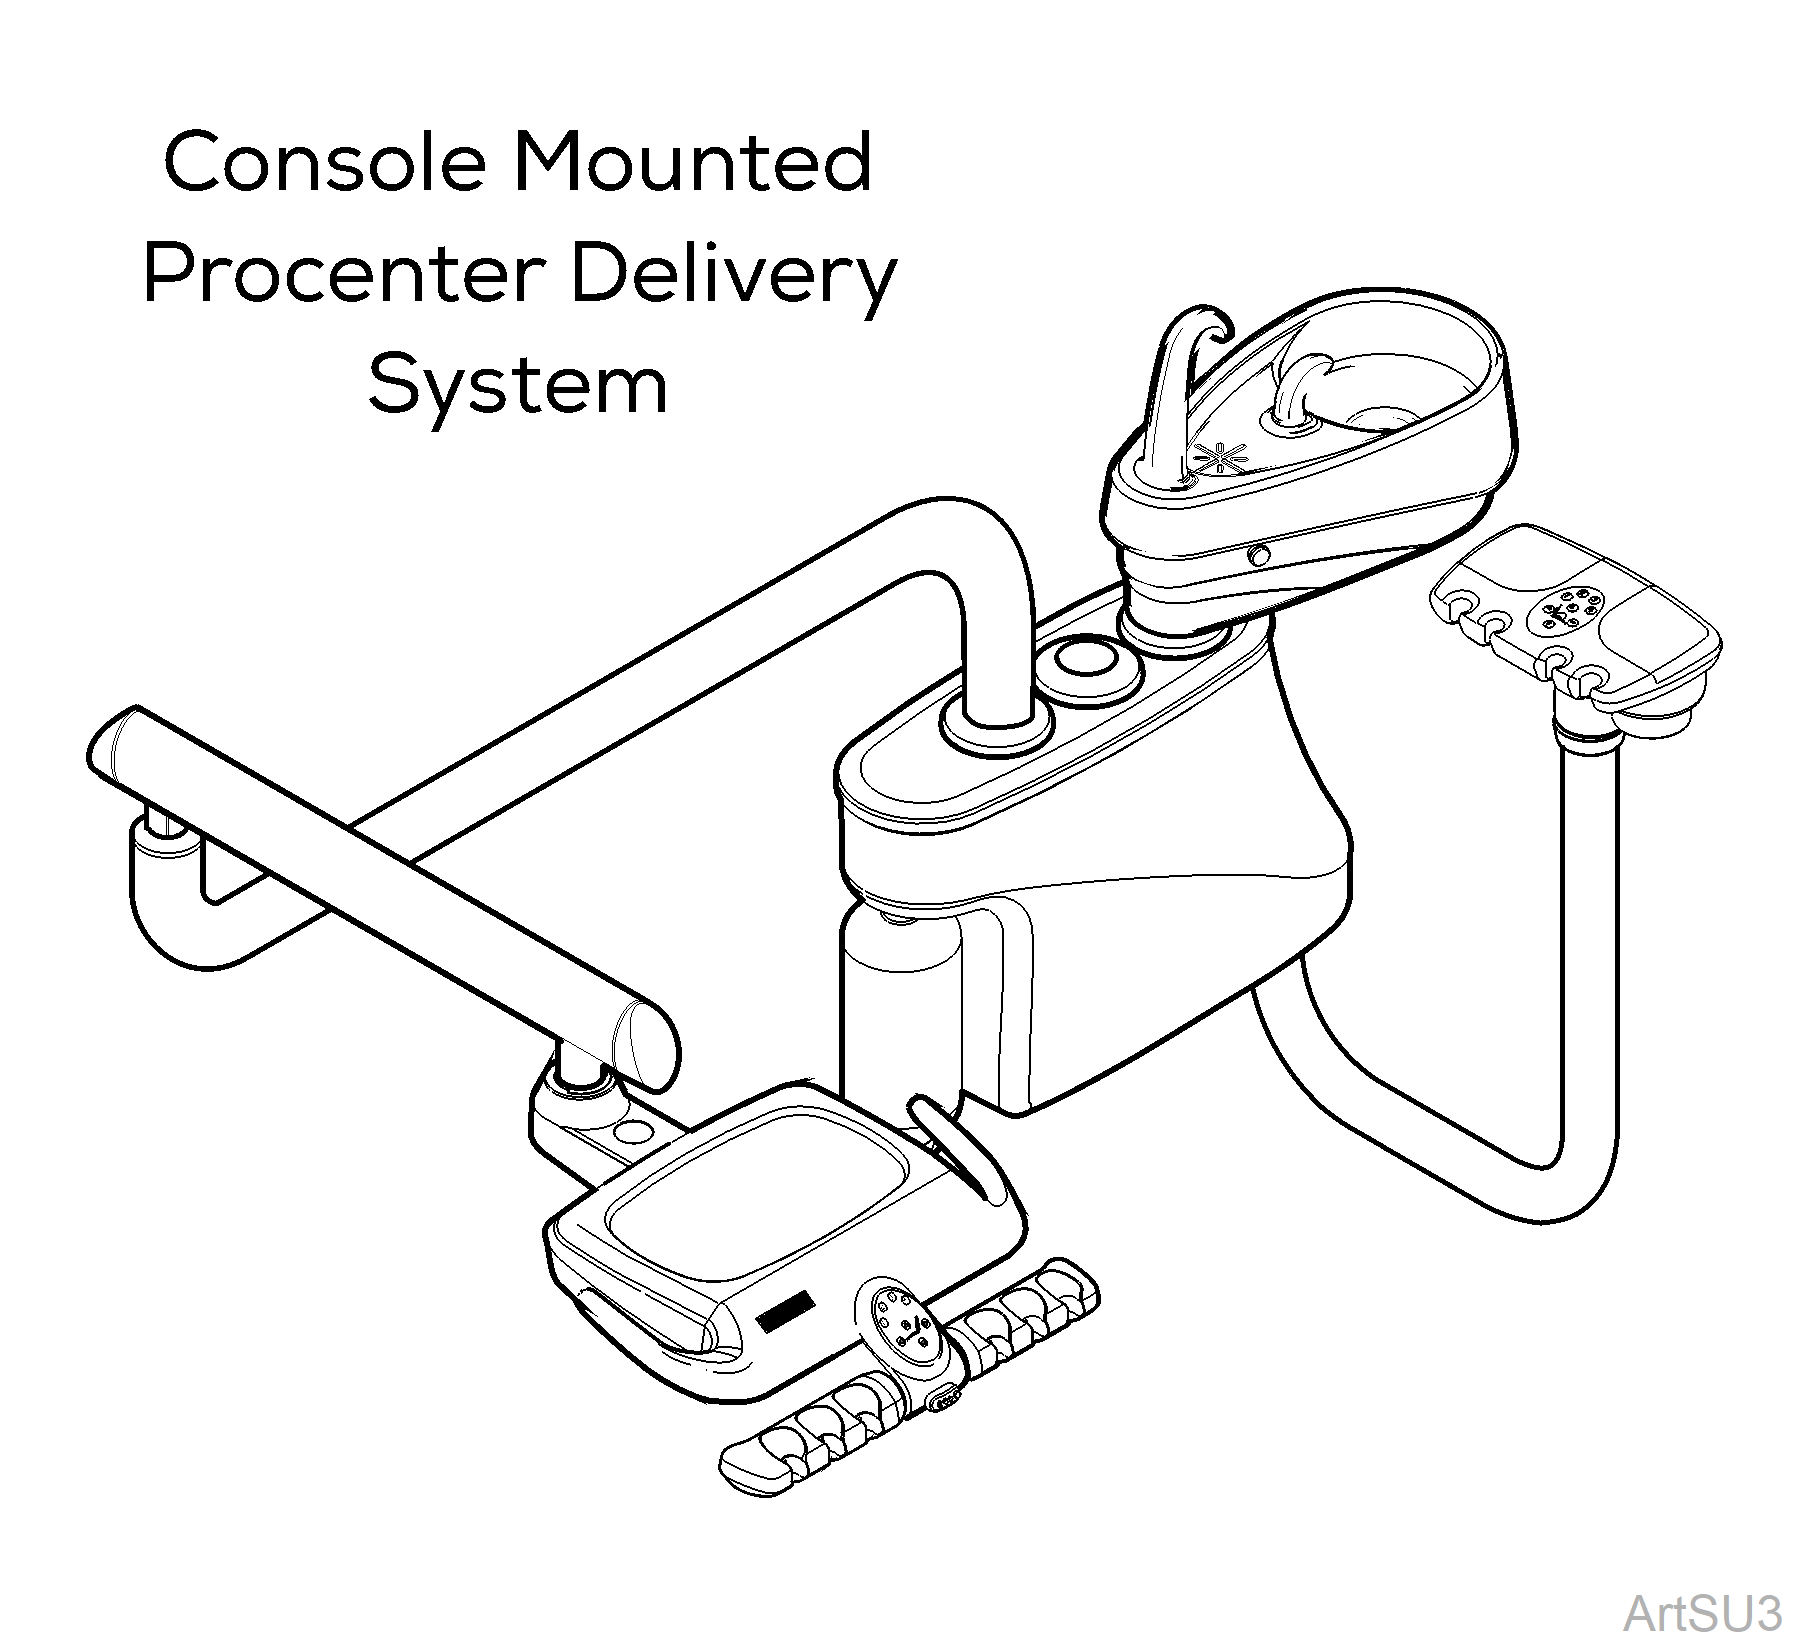 Console Mounted Procenter Delivery System